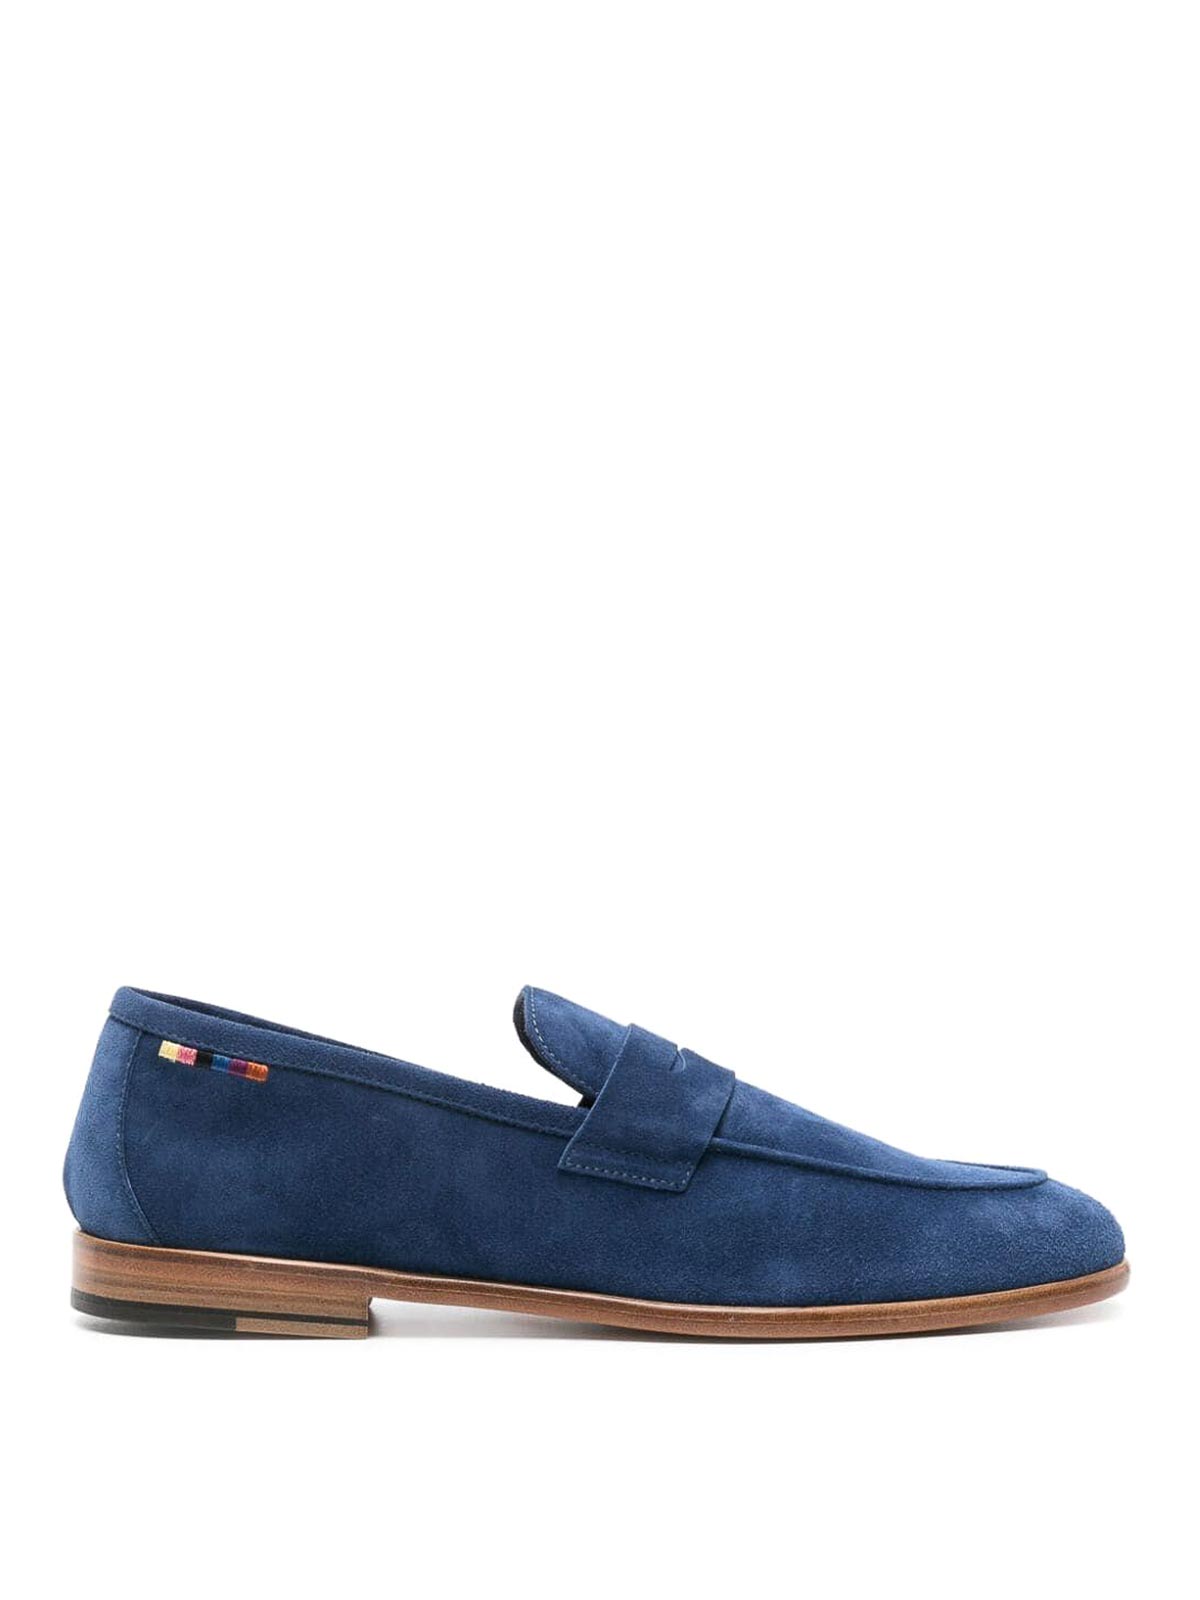 Paul Smith Classic Shoes In Blue